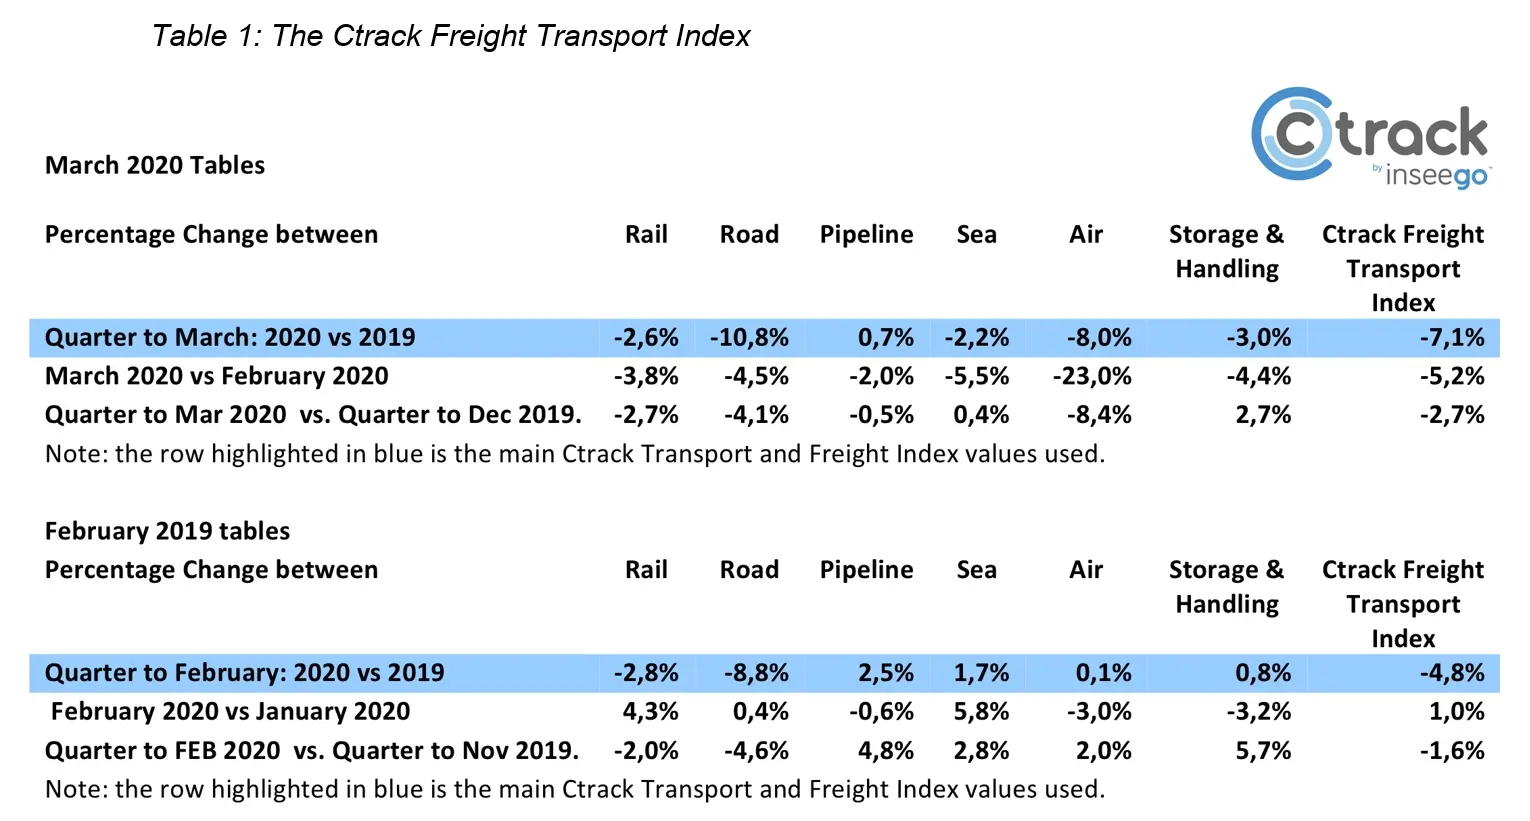 Table 1-The Ctrack Freight Transport Index- April 2020